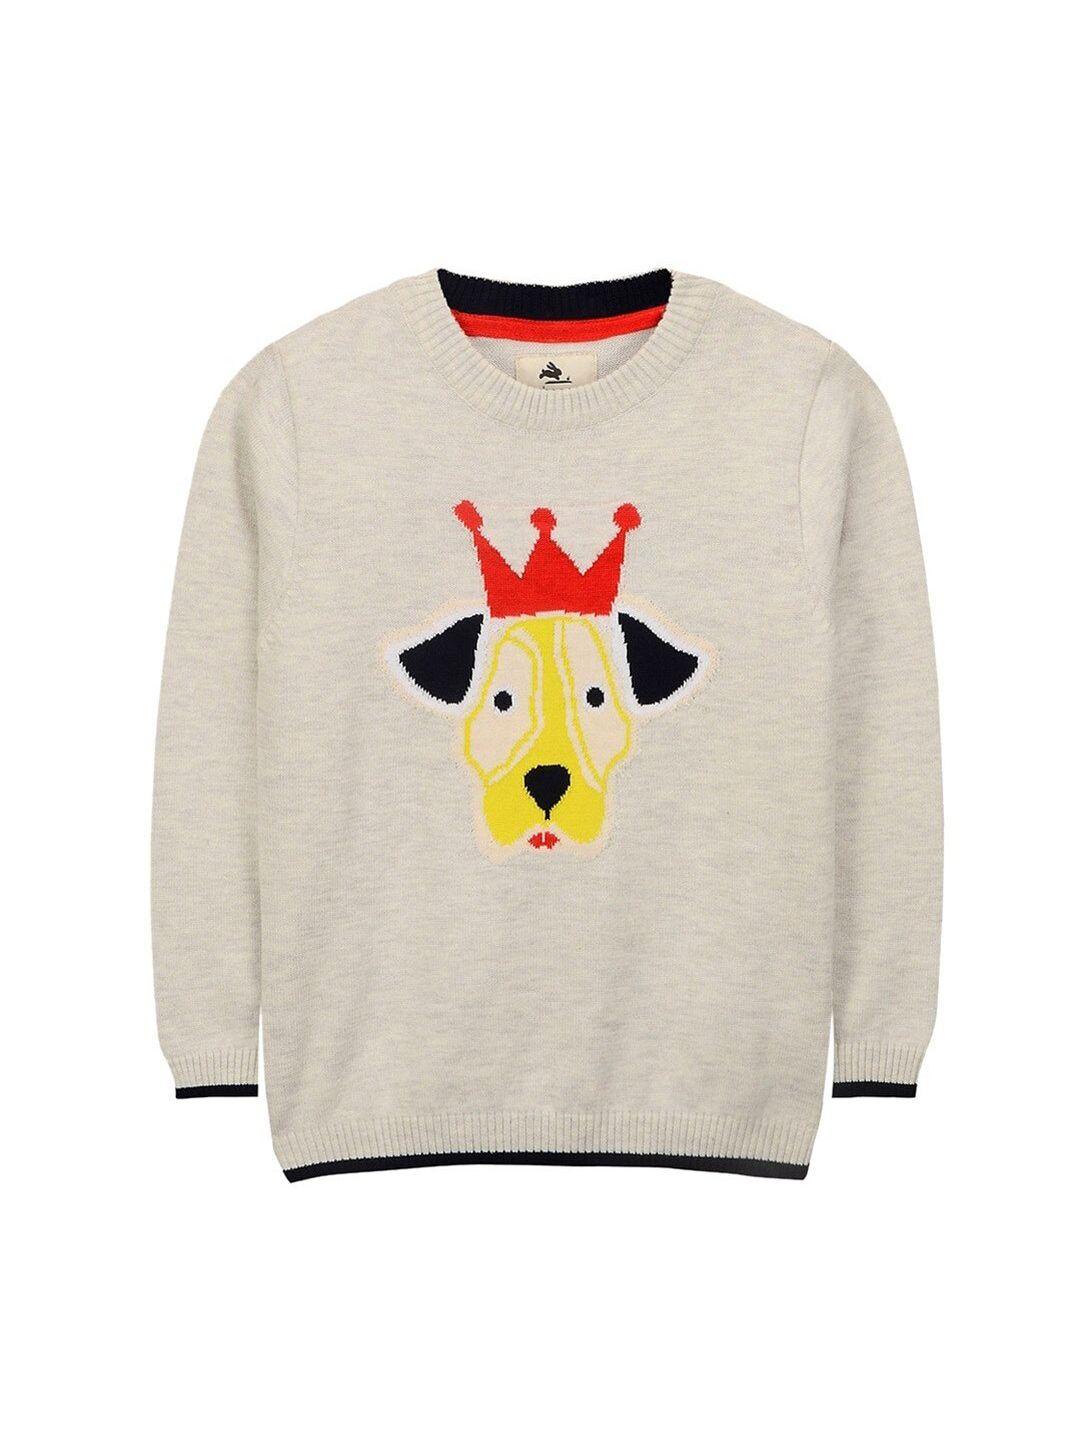 cherry crumble unisex kids grey printed pullover sweater